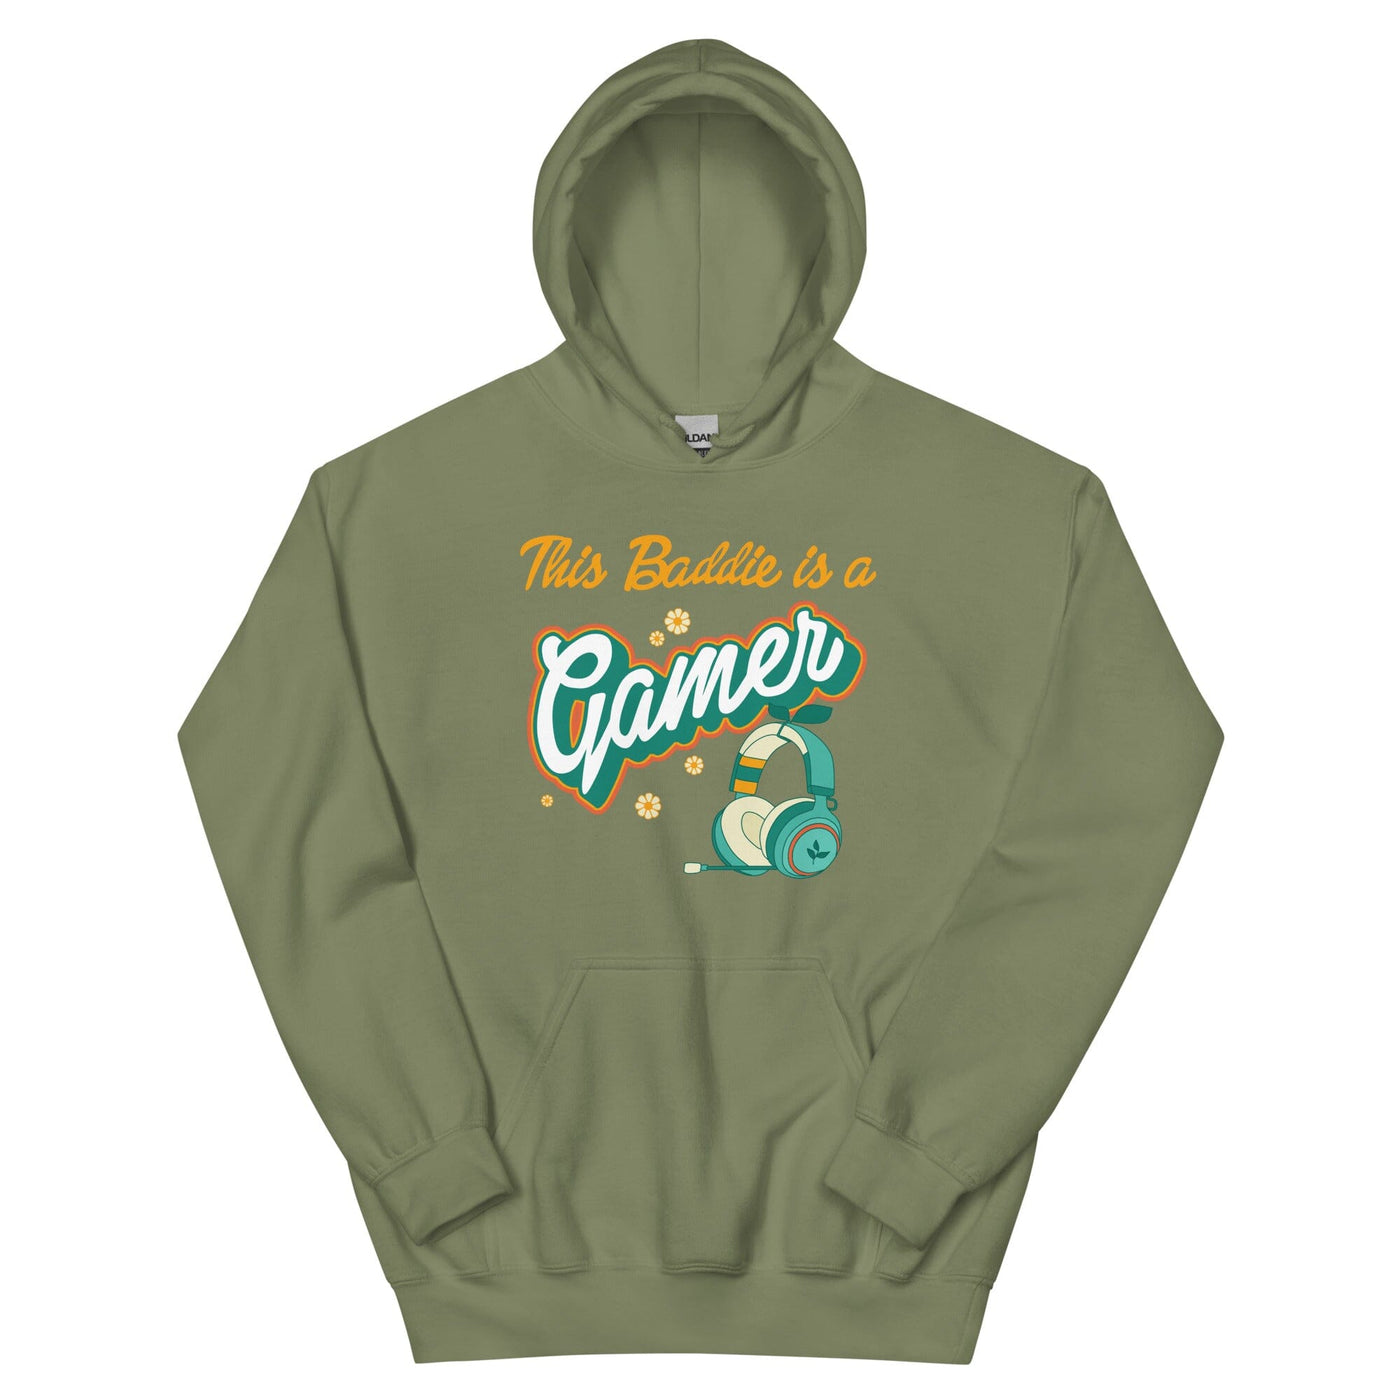 This Baddie is a Gamer | Unisex Hoodie | Feminist Gamer Threads & Thistles Inventory Military Green S 